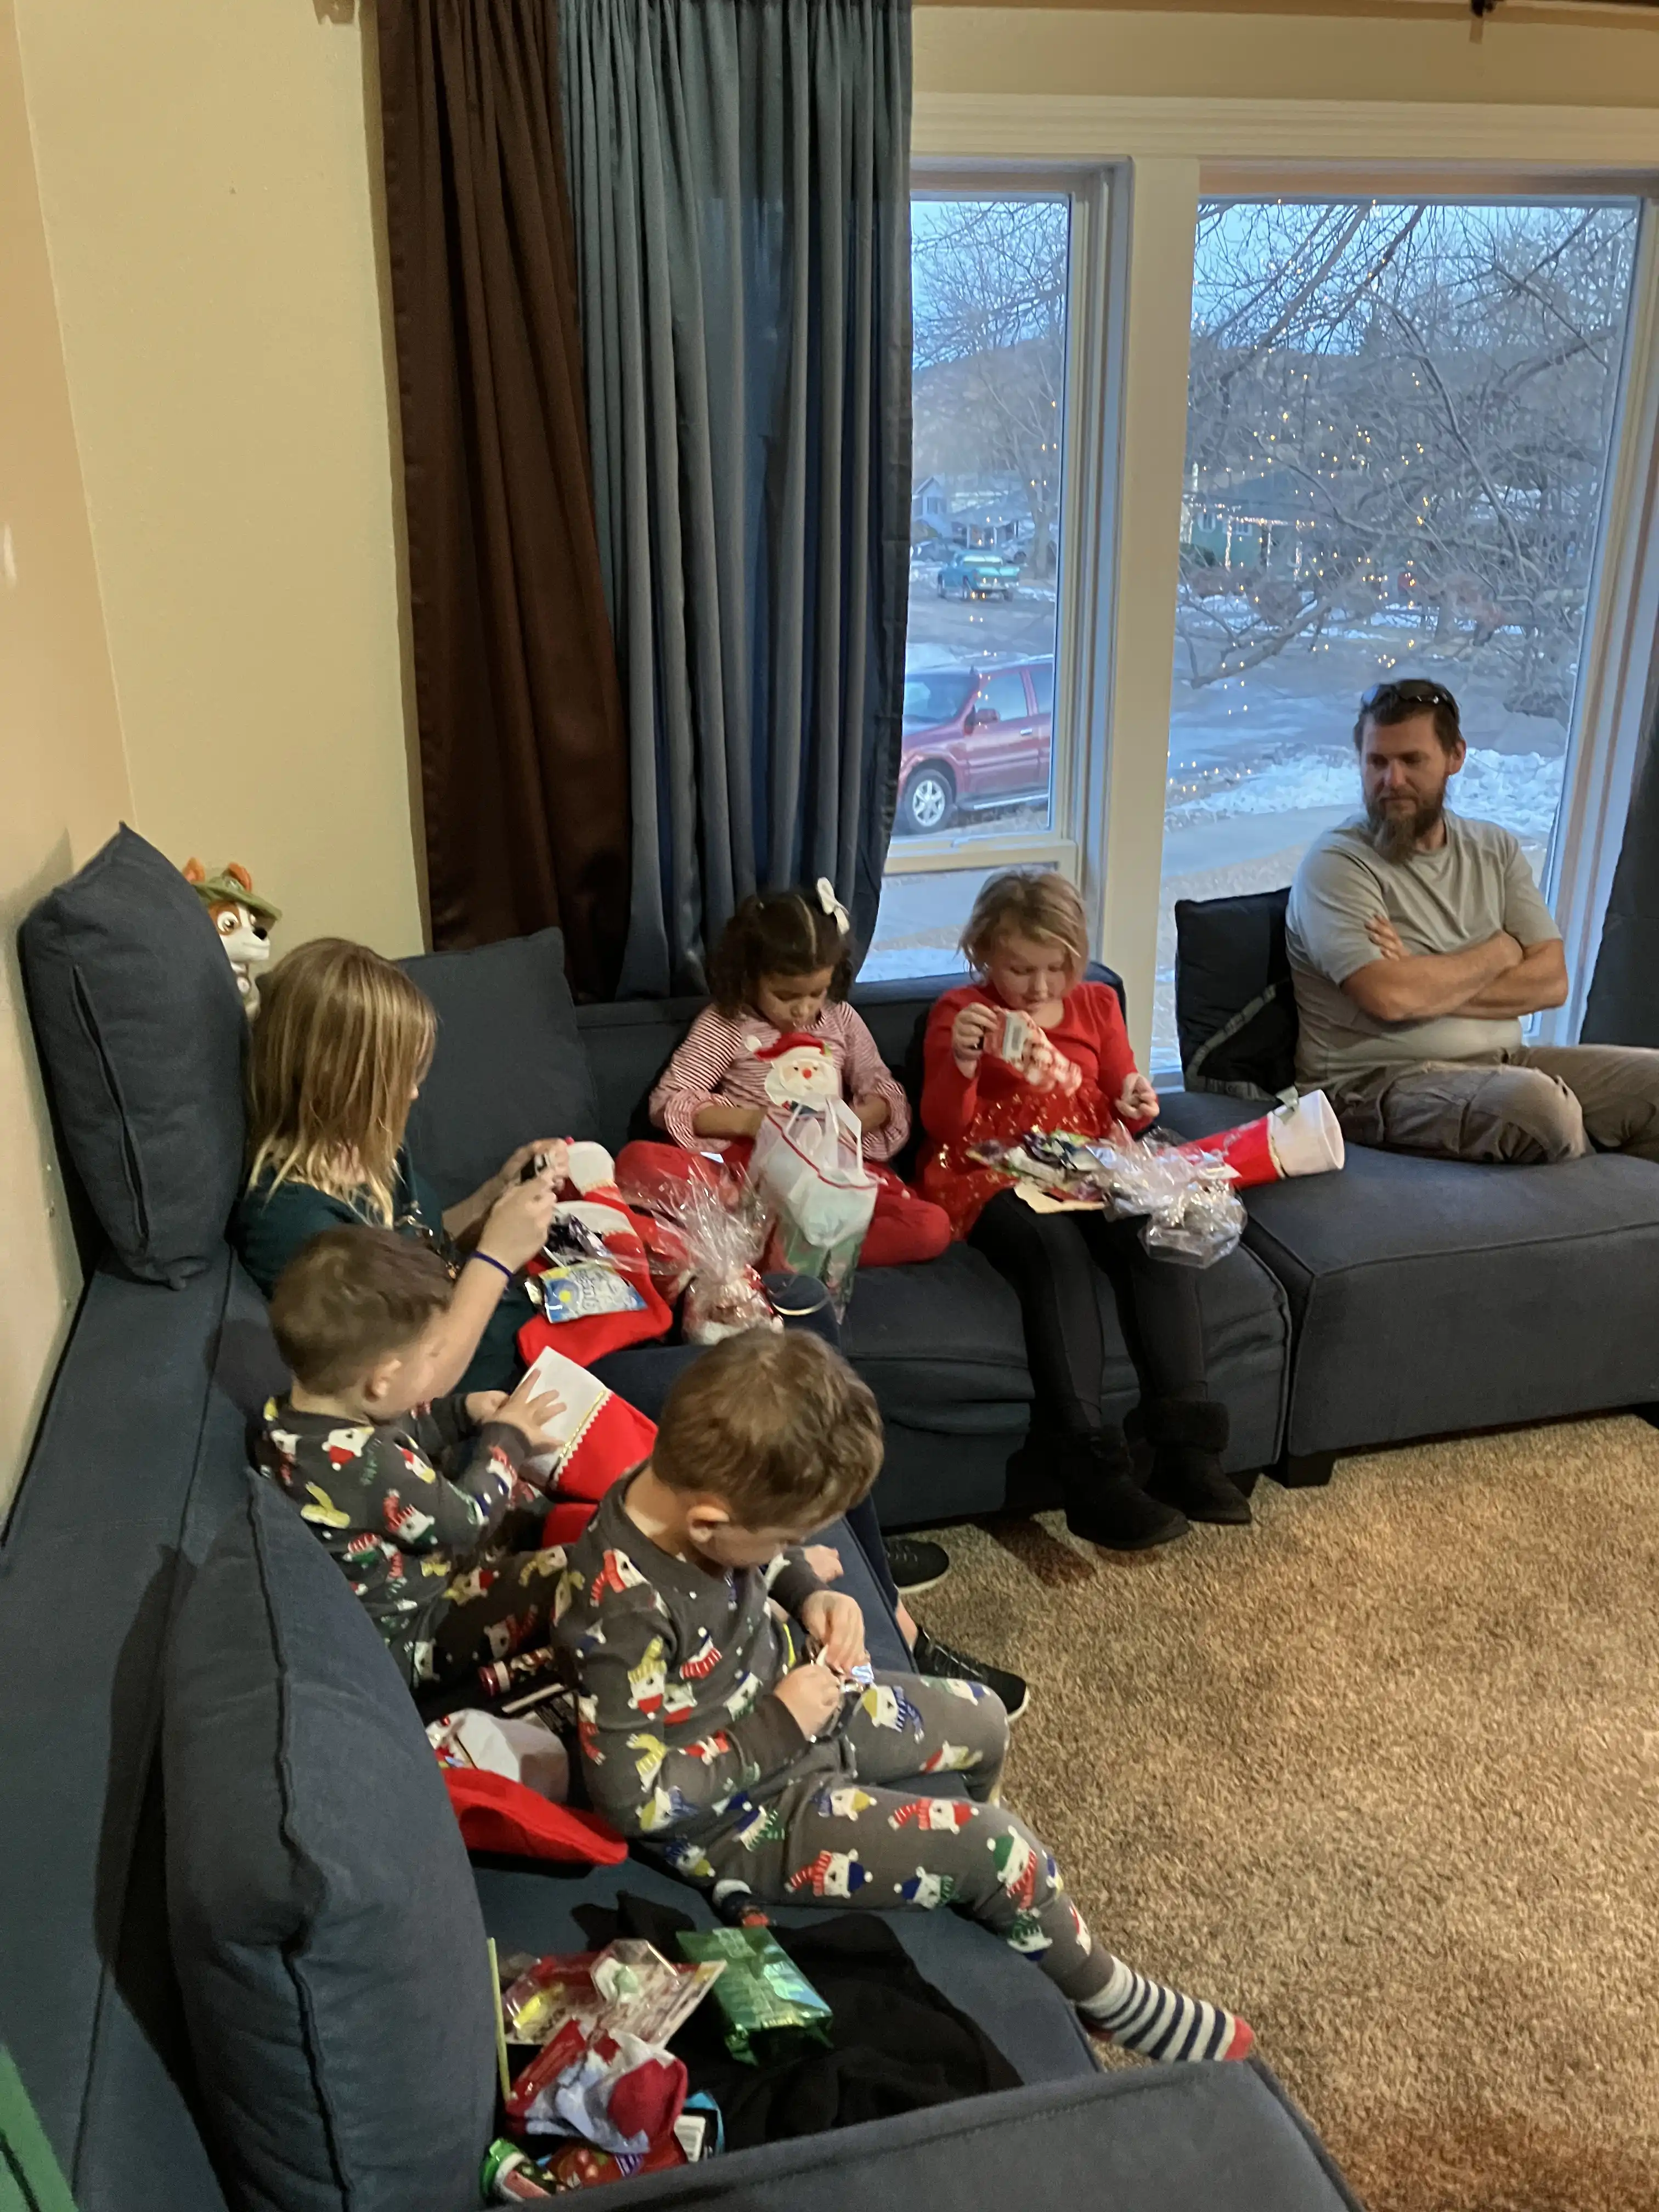 The kids opening their stockings.